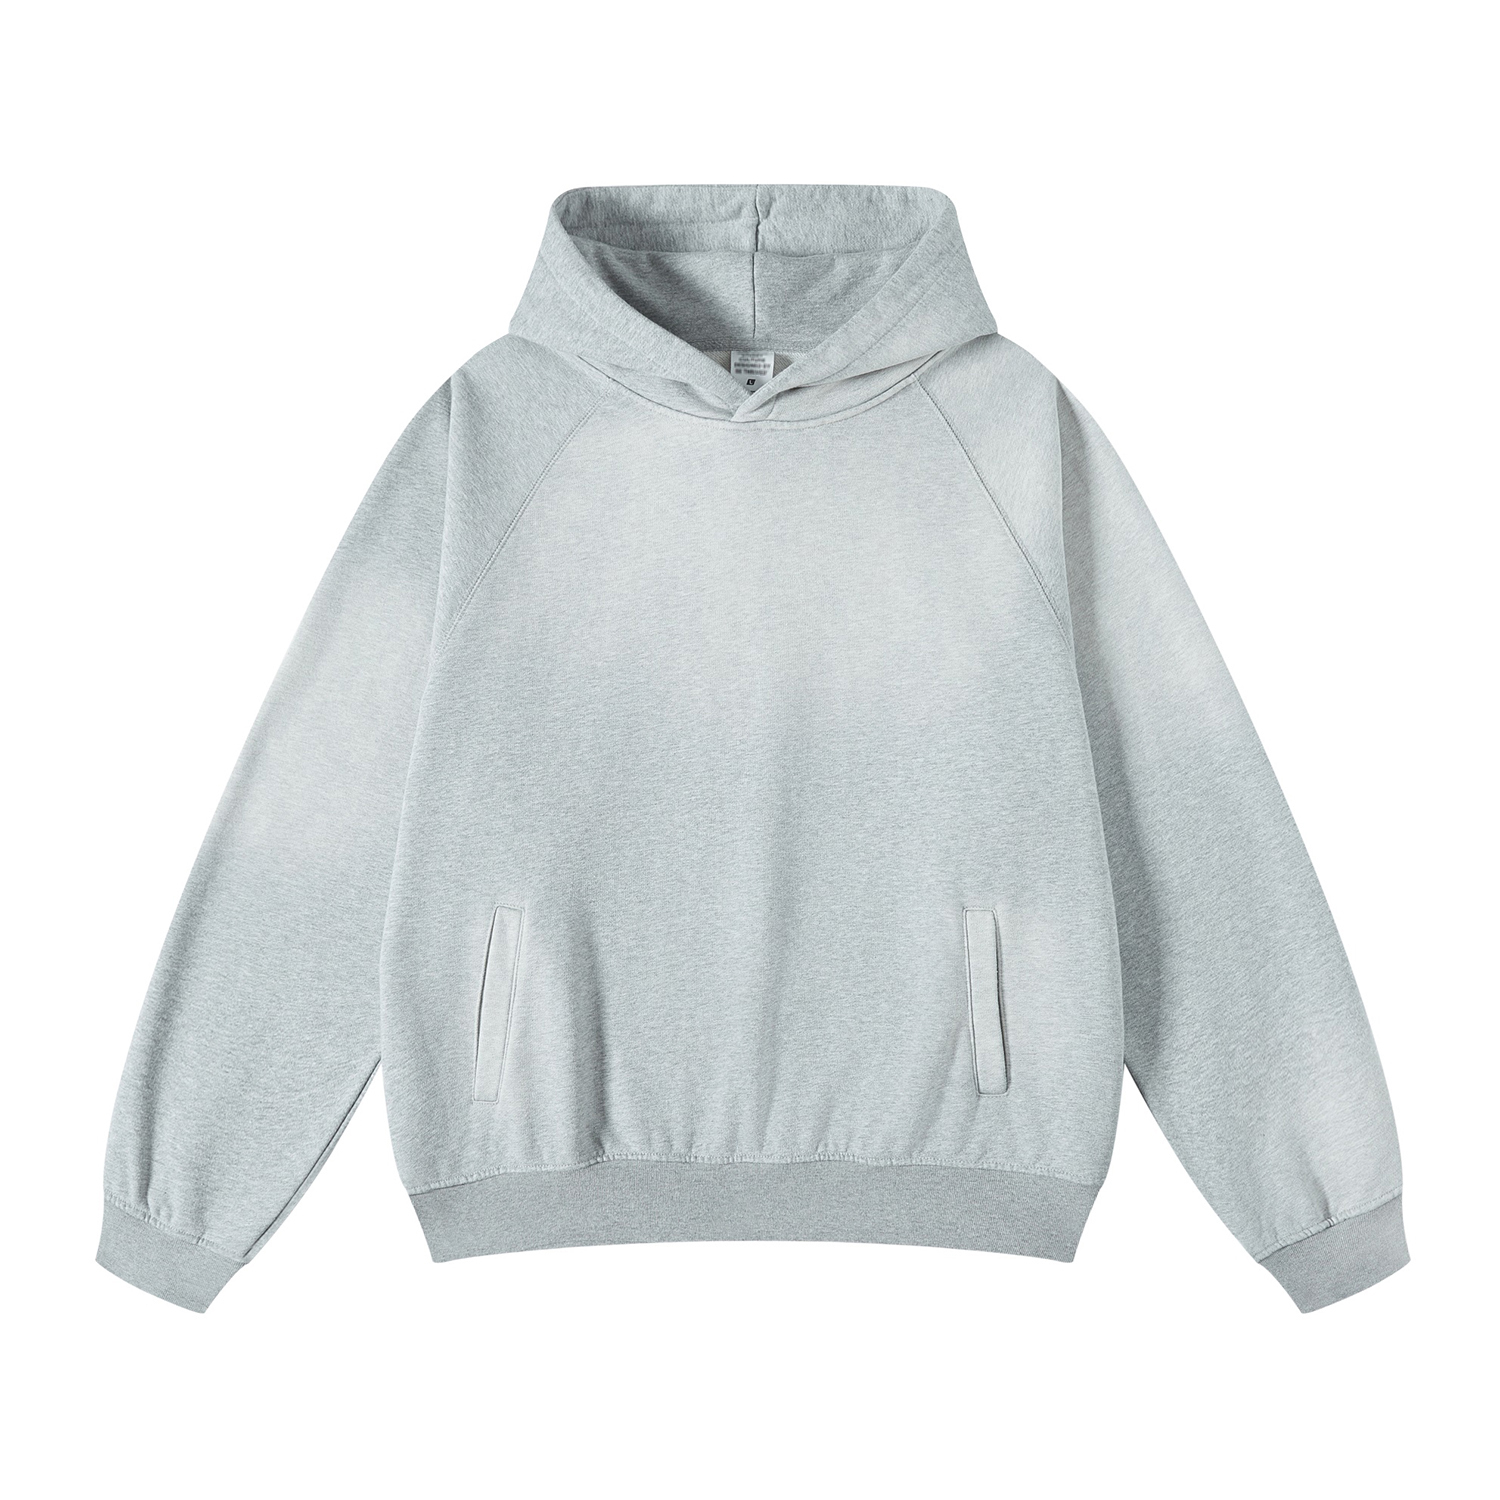 Streetwear Unisex Ombre Washed Effect Colored Hoodie - Print On Demand-5